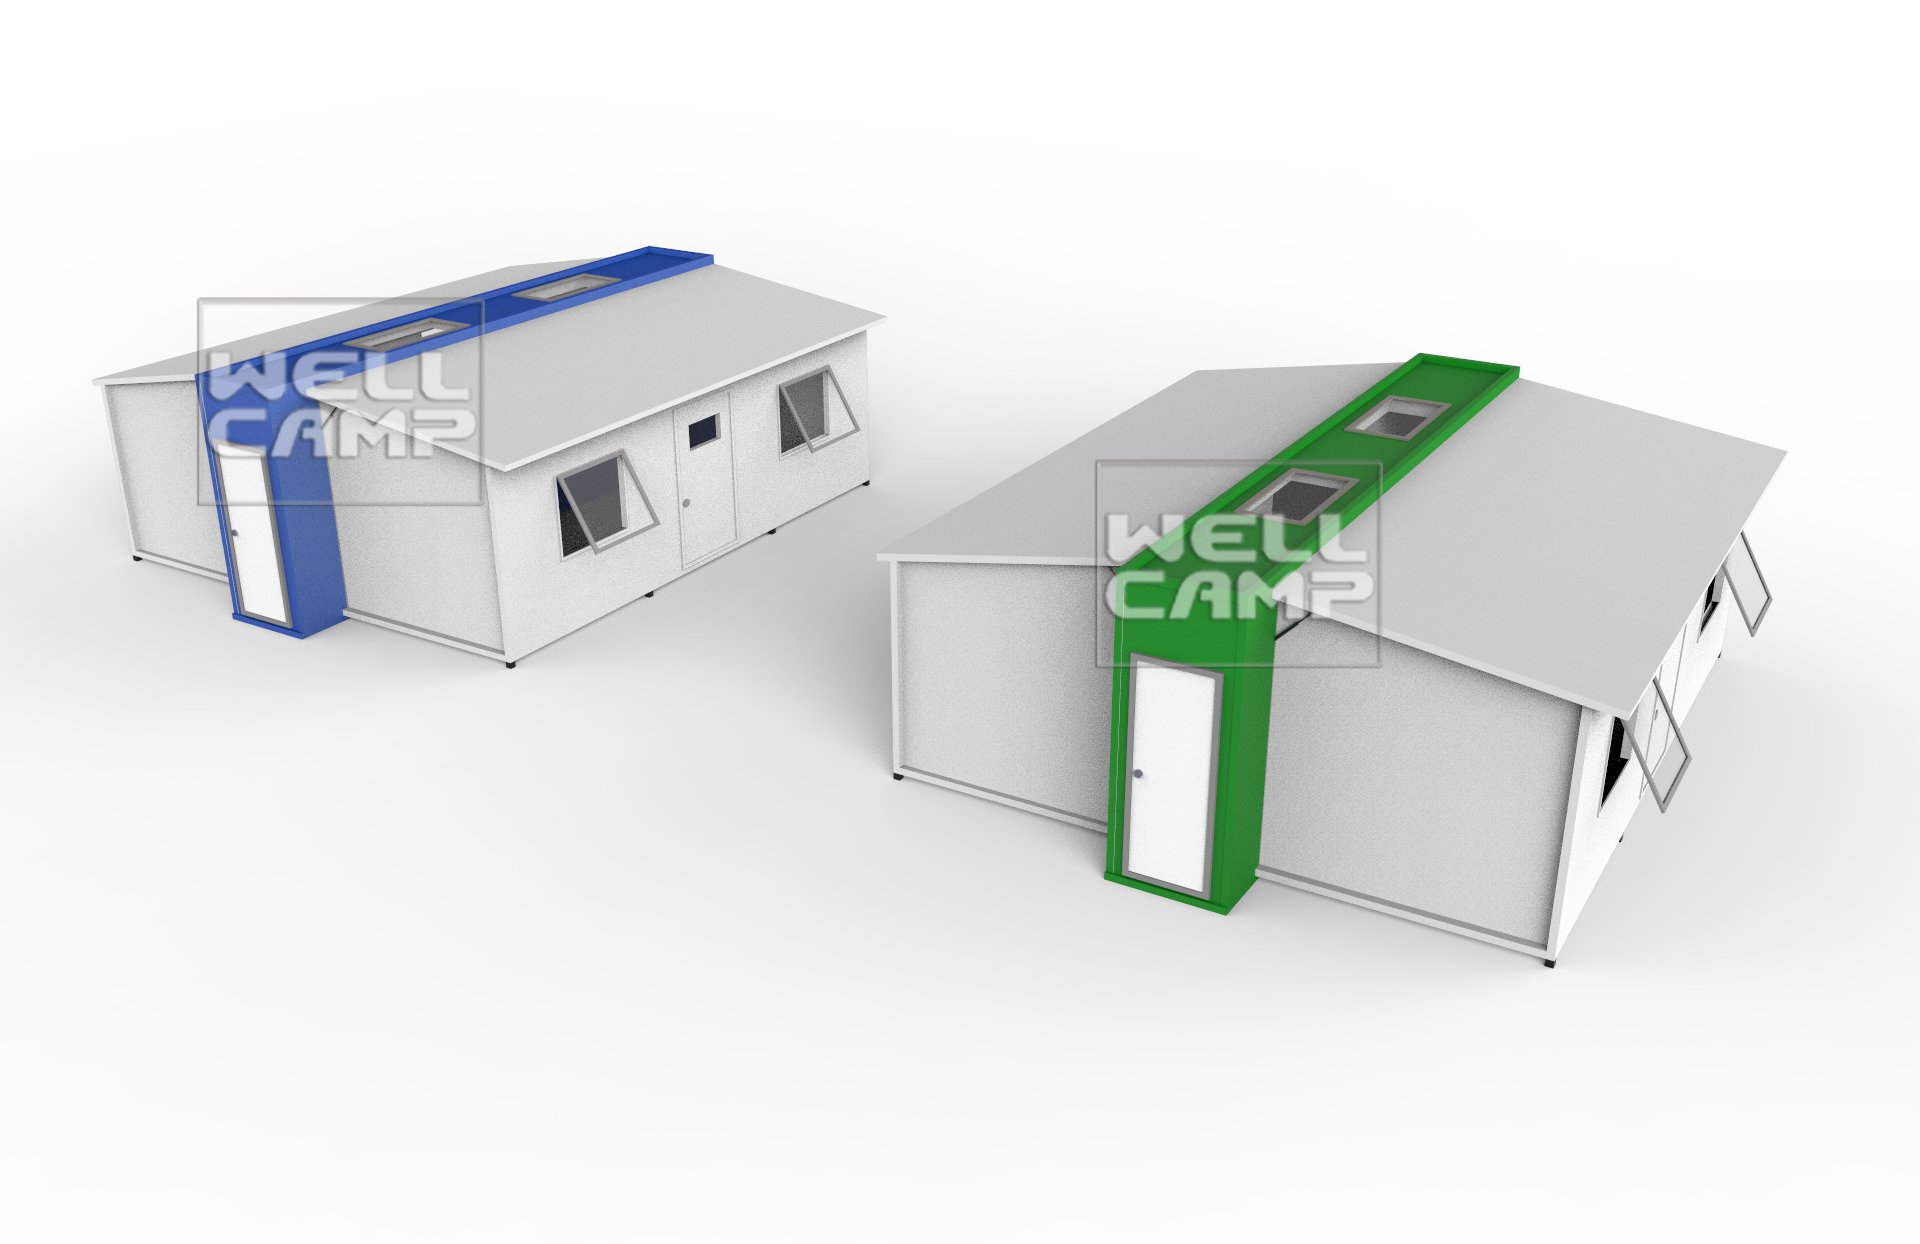 WELLCAMP Expandable Container Shelters House for Family & Student Dormitory E-01 Expandable Container House image17